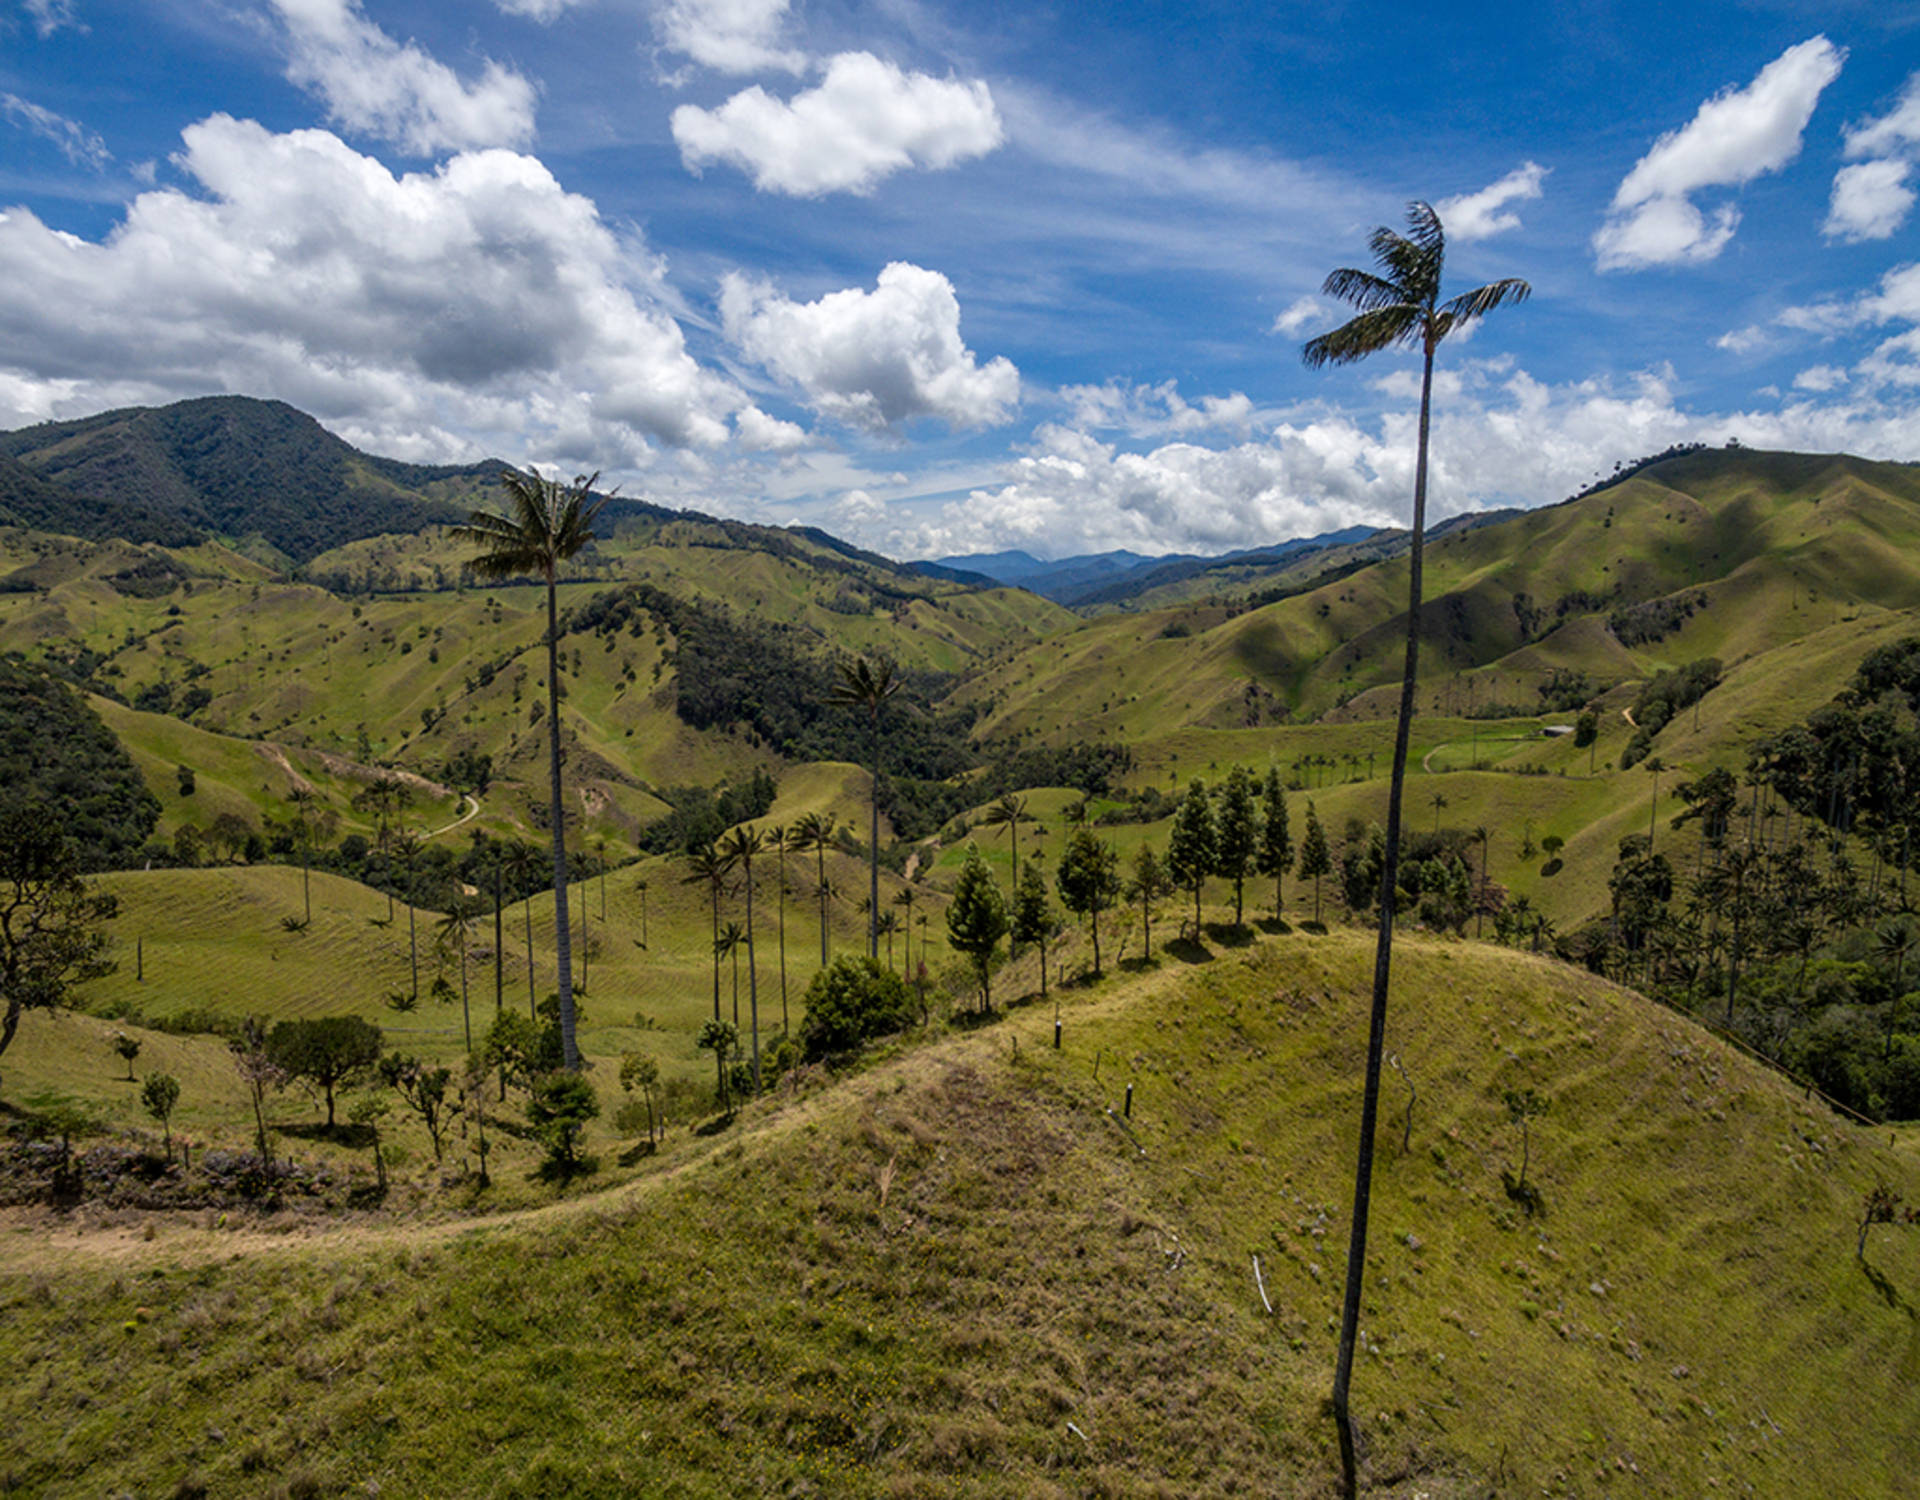 Cocora Valley and Salento Hike Tour